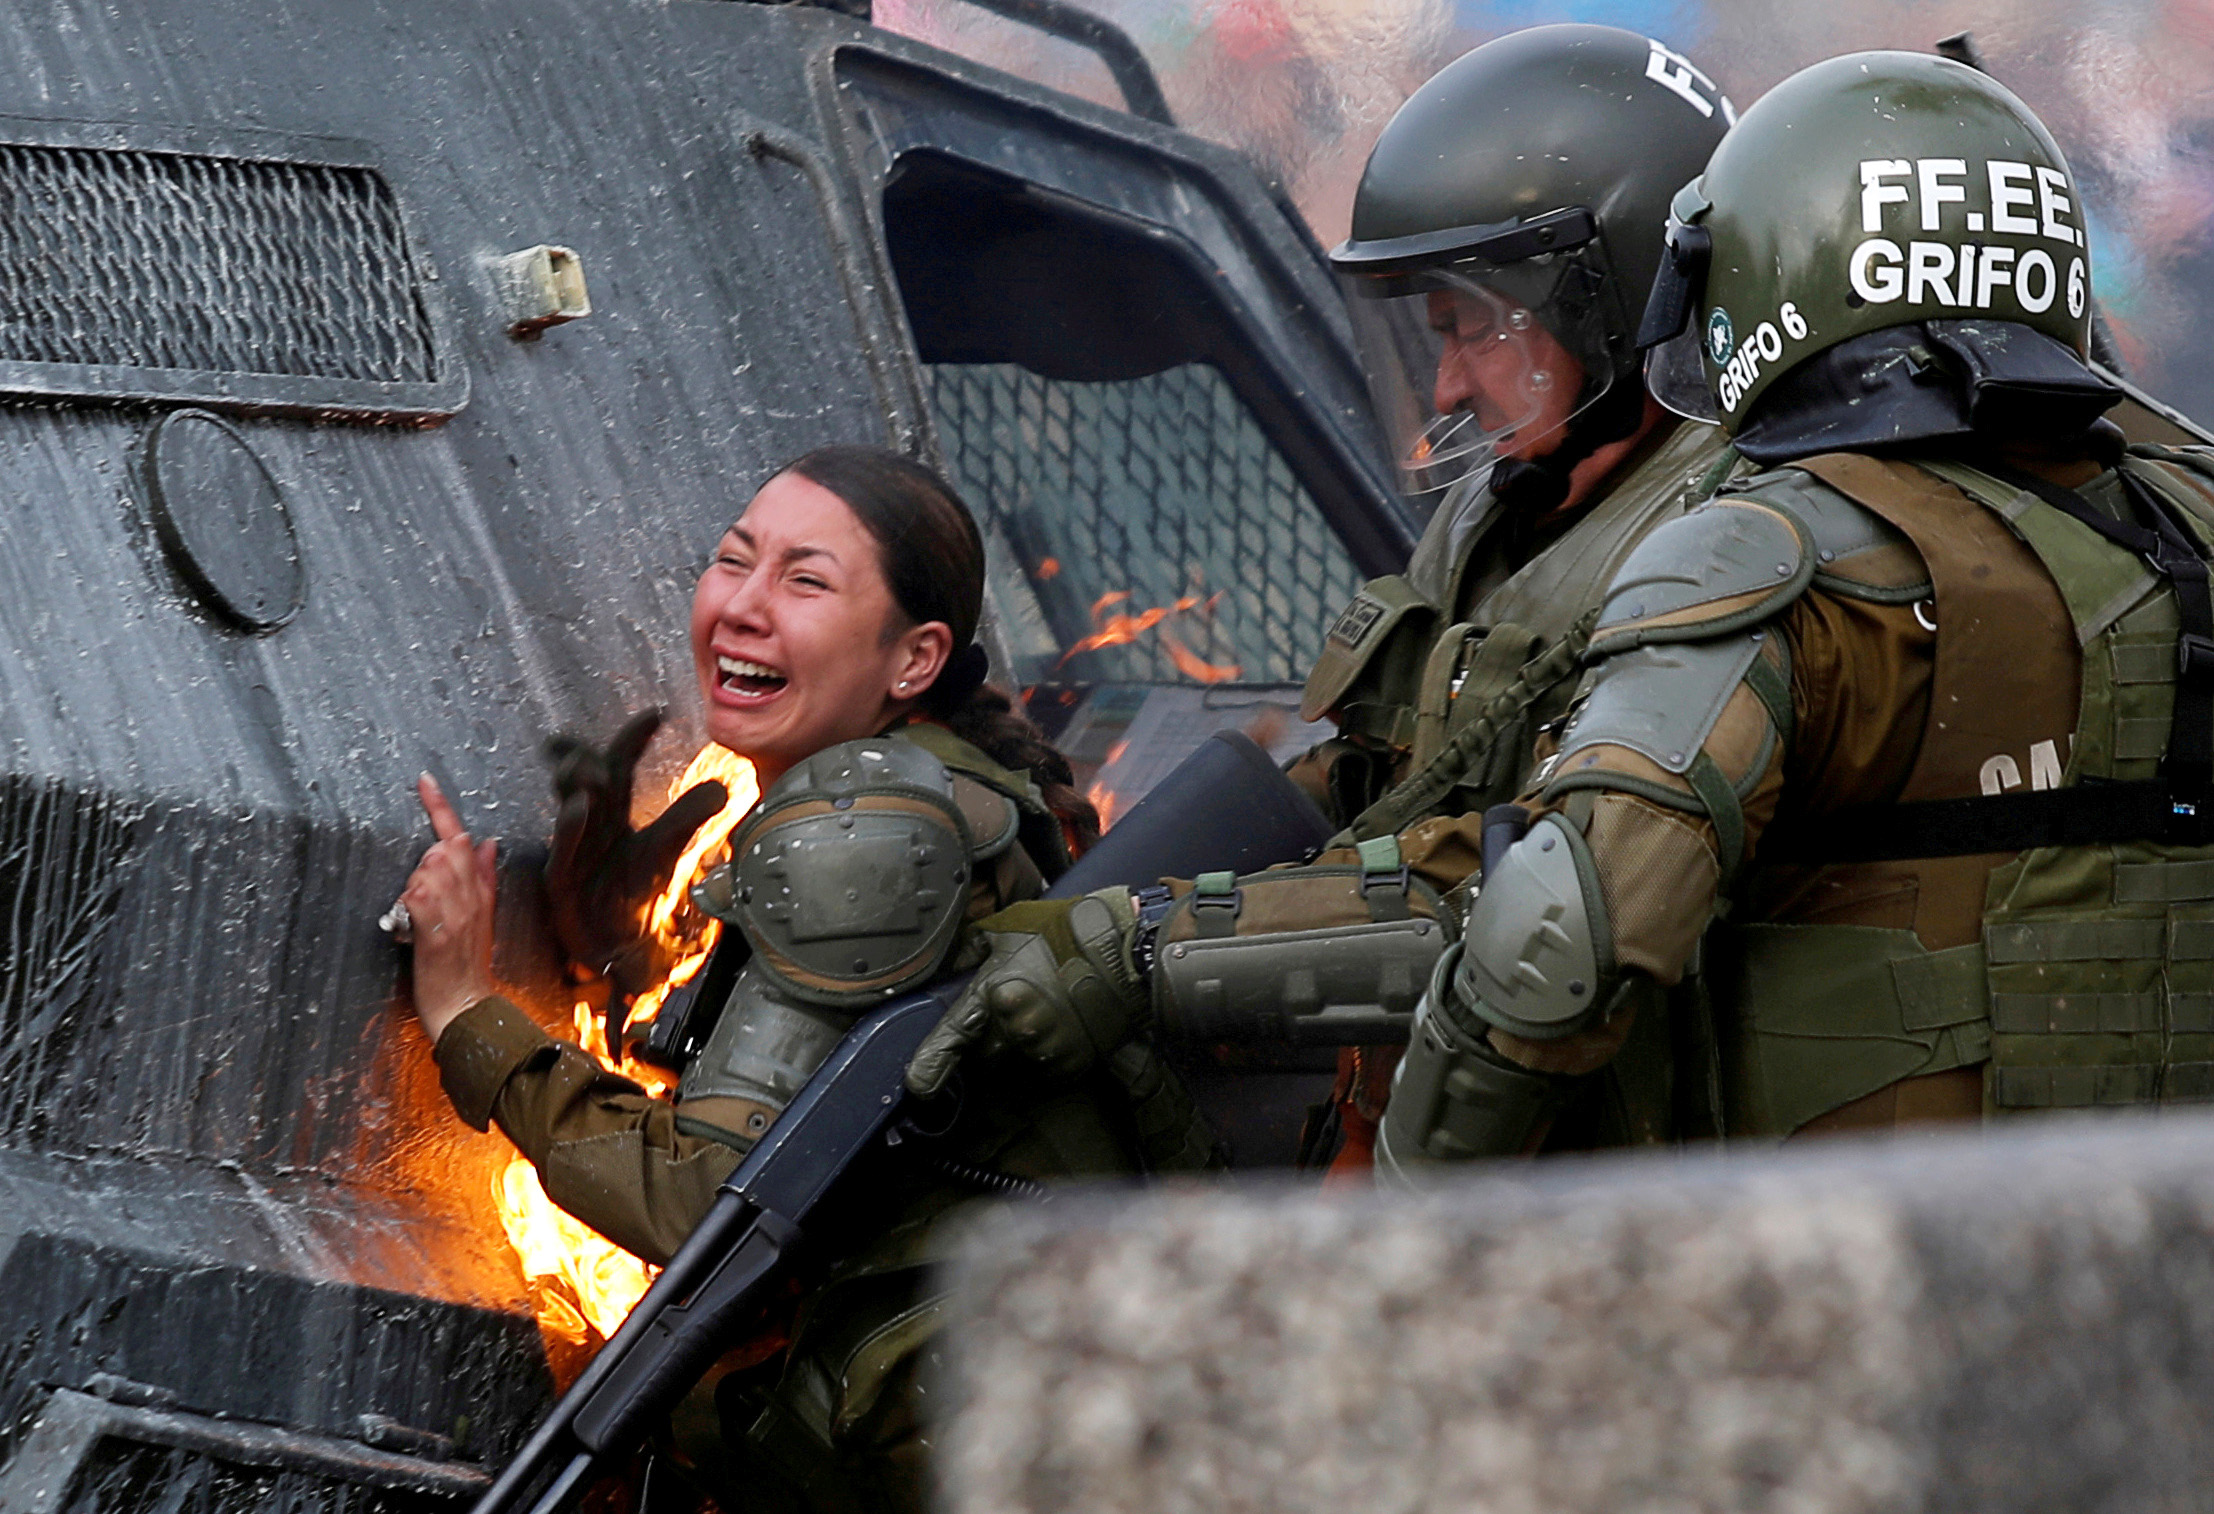 PHOTO: A riot police officer on fire reacts during a protest against Chile's government in Santiago, Chile, Nov. 4, 2019.